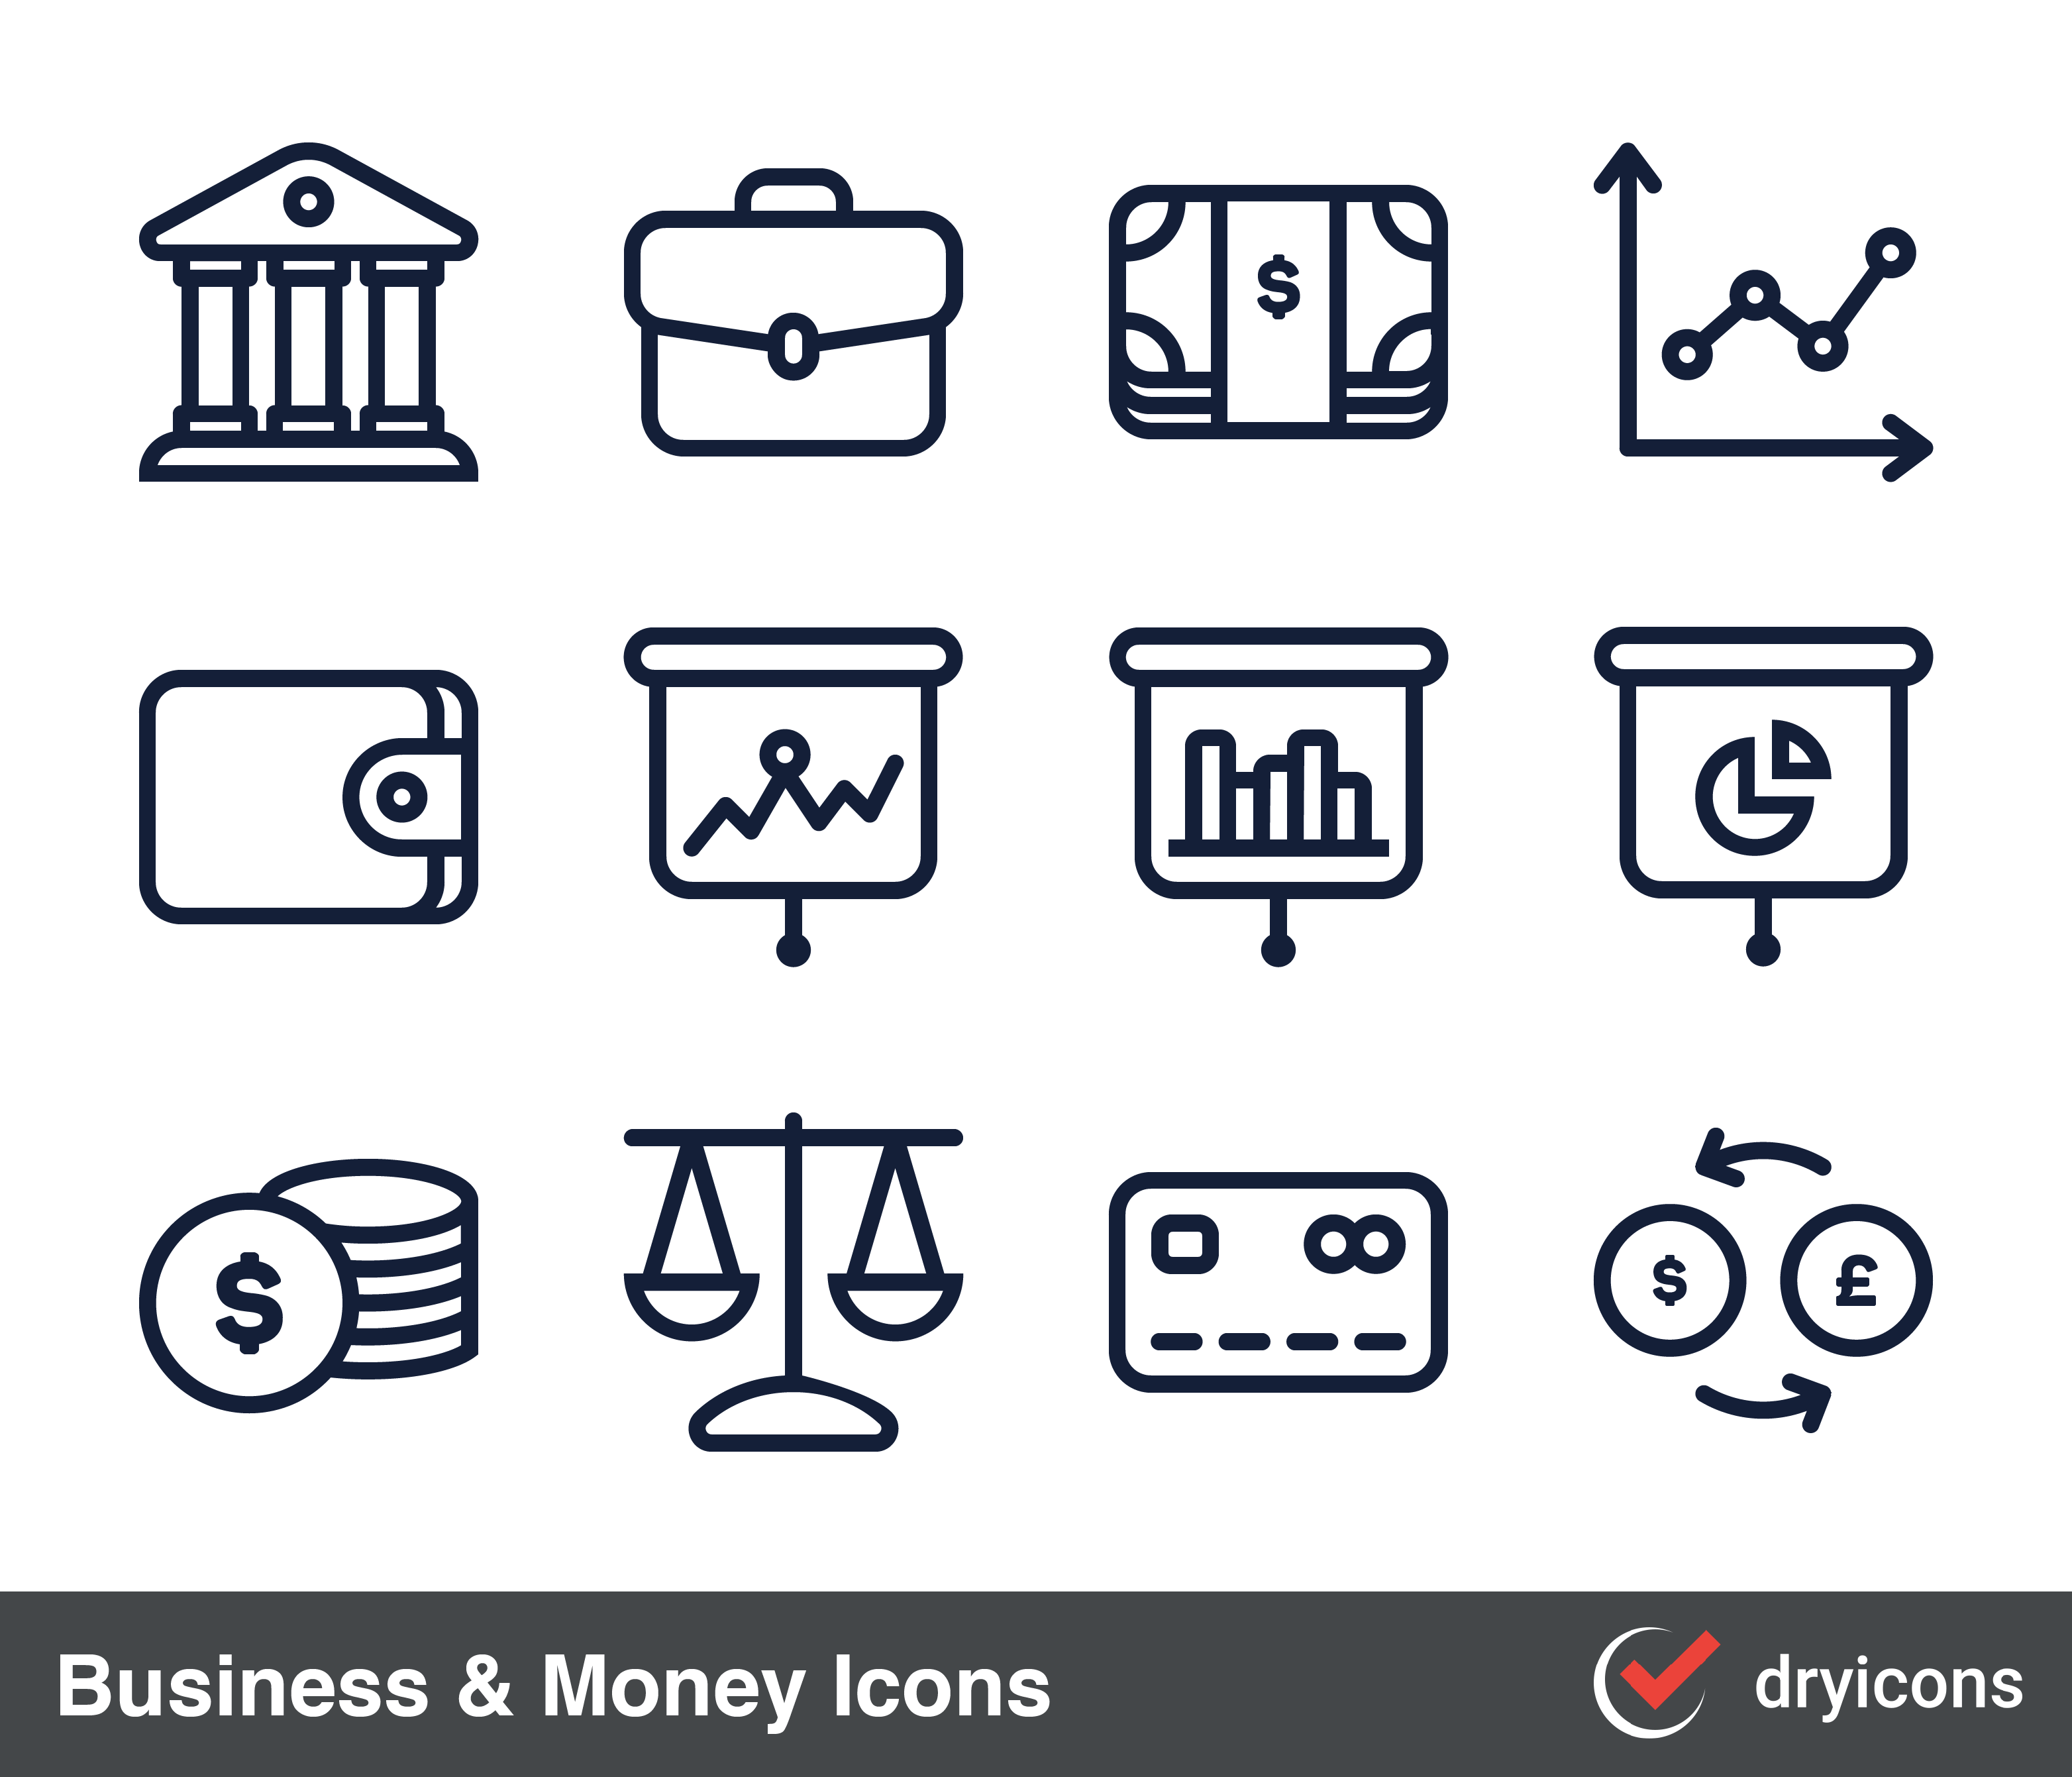 dryicons com  u2014 icons and vector graphics